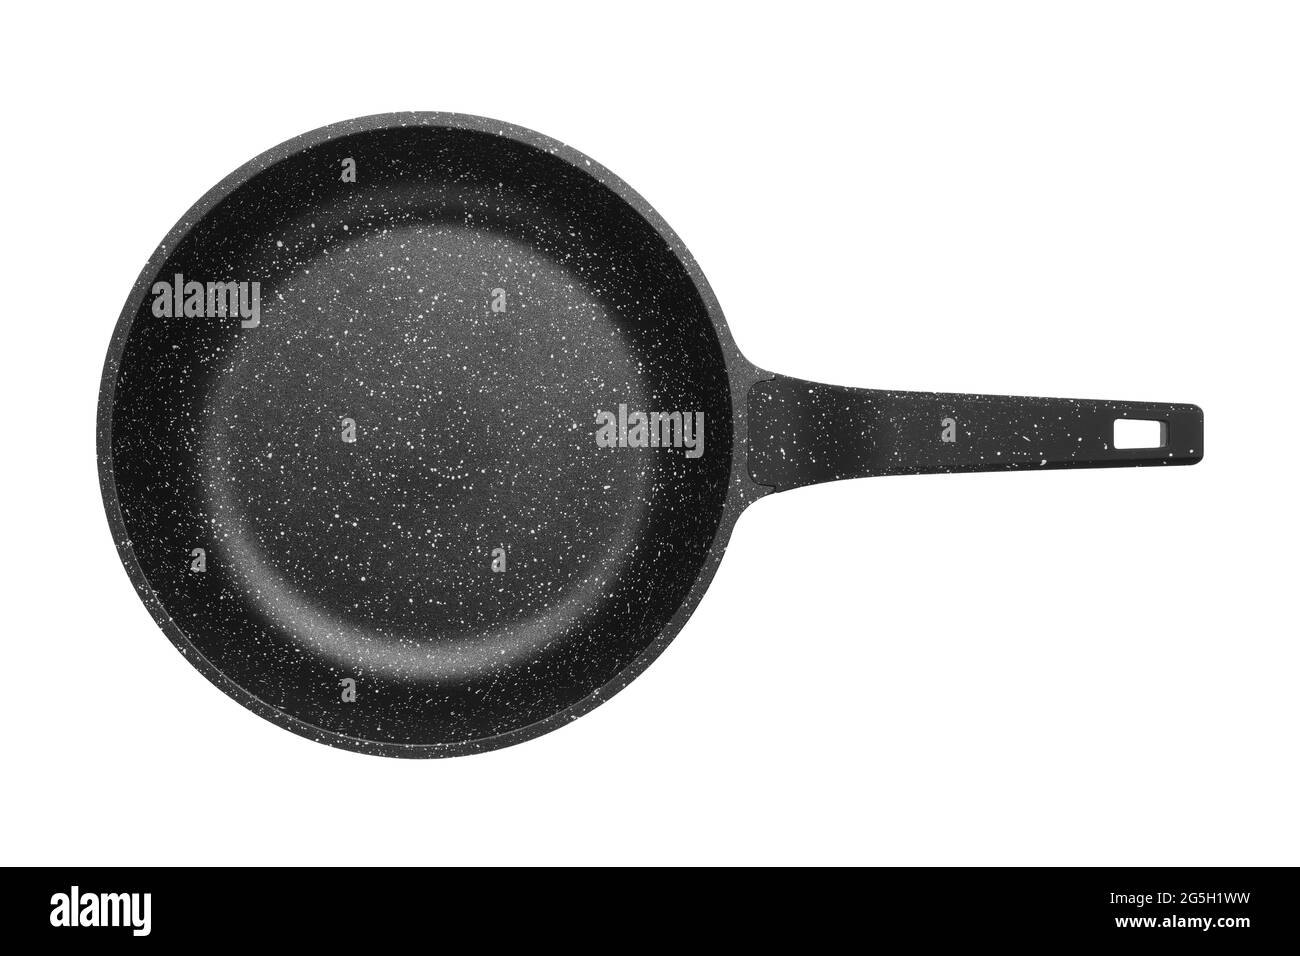 Frying pan with marble covering. Fry pan isolated on white. Top view. Stock Photo